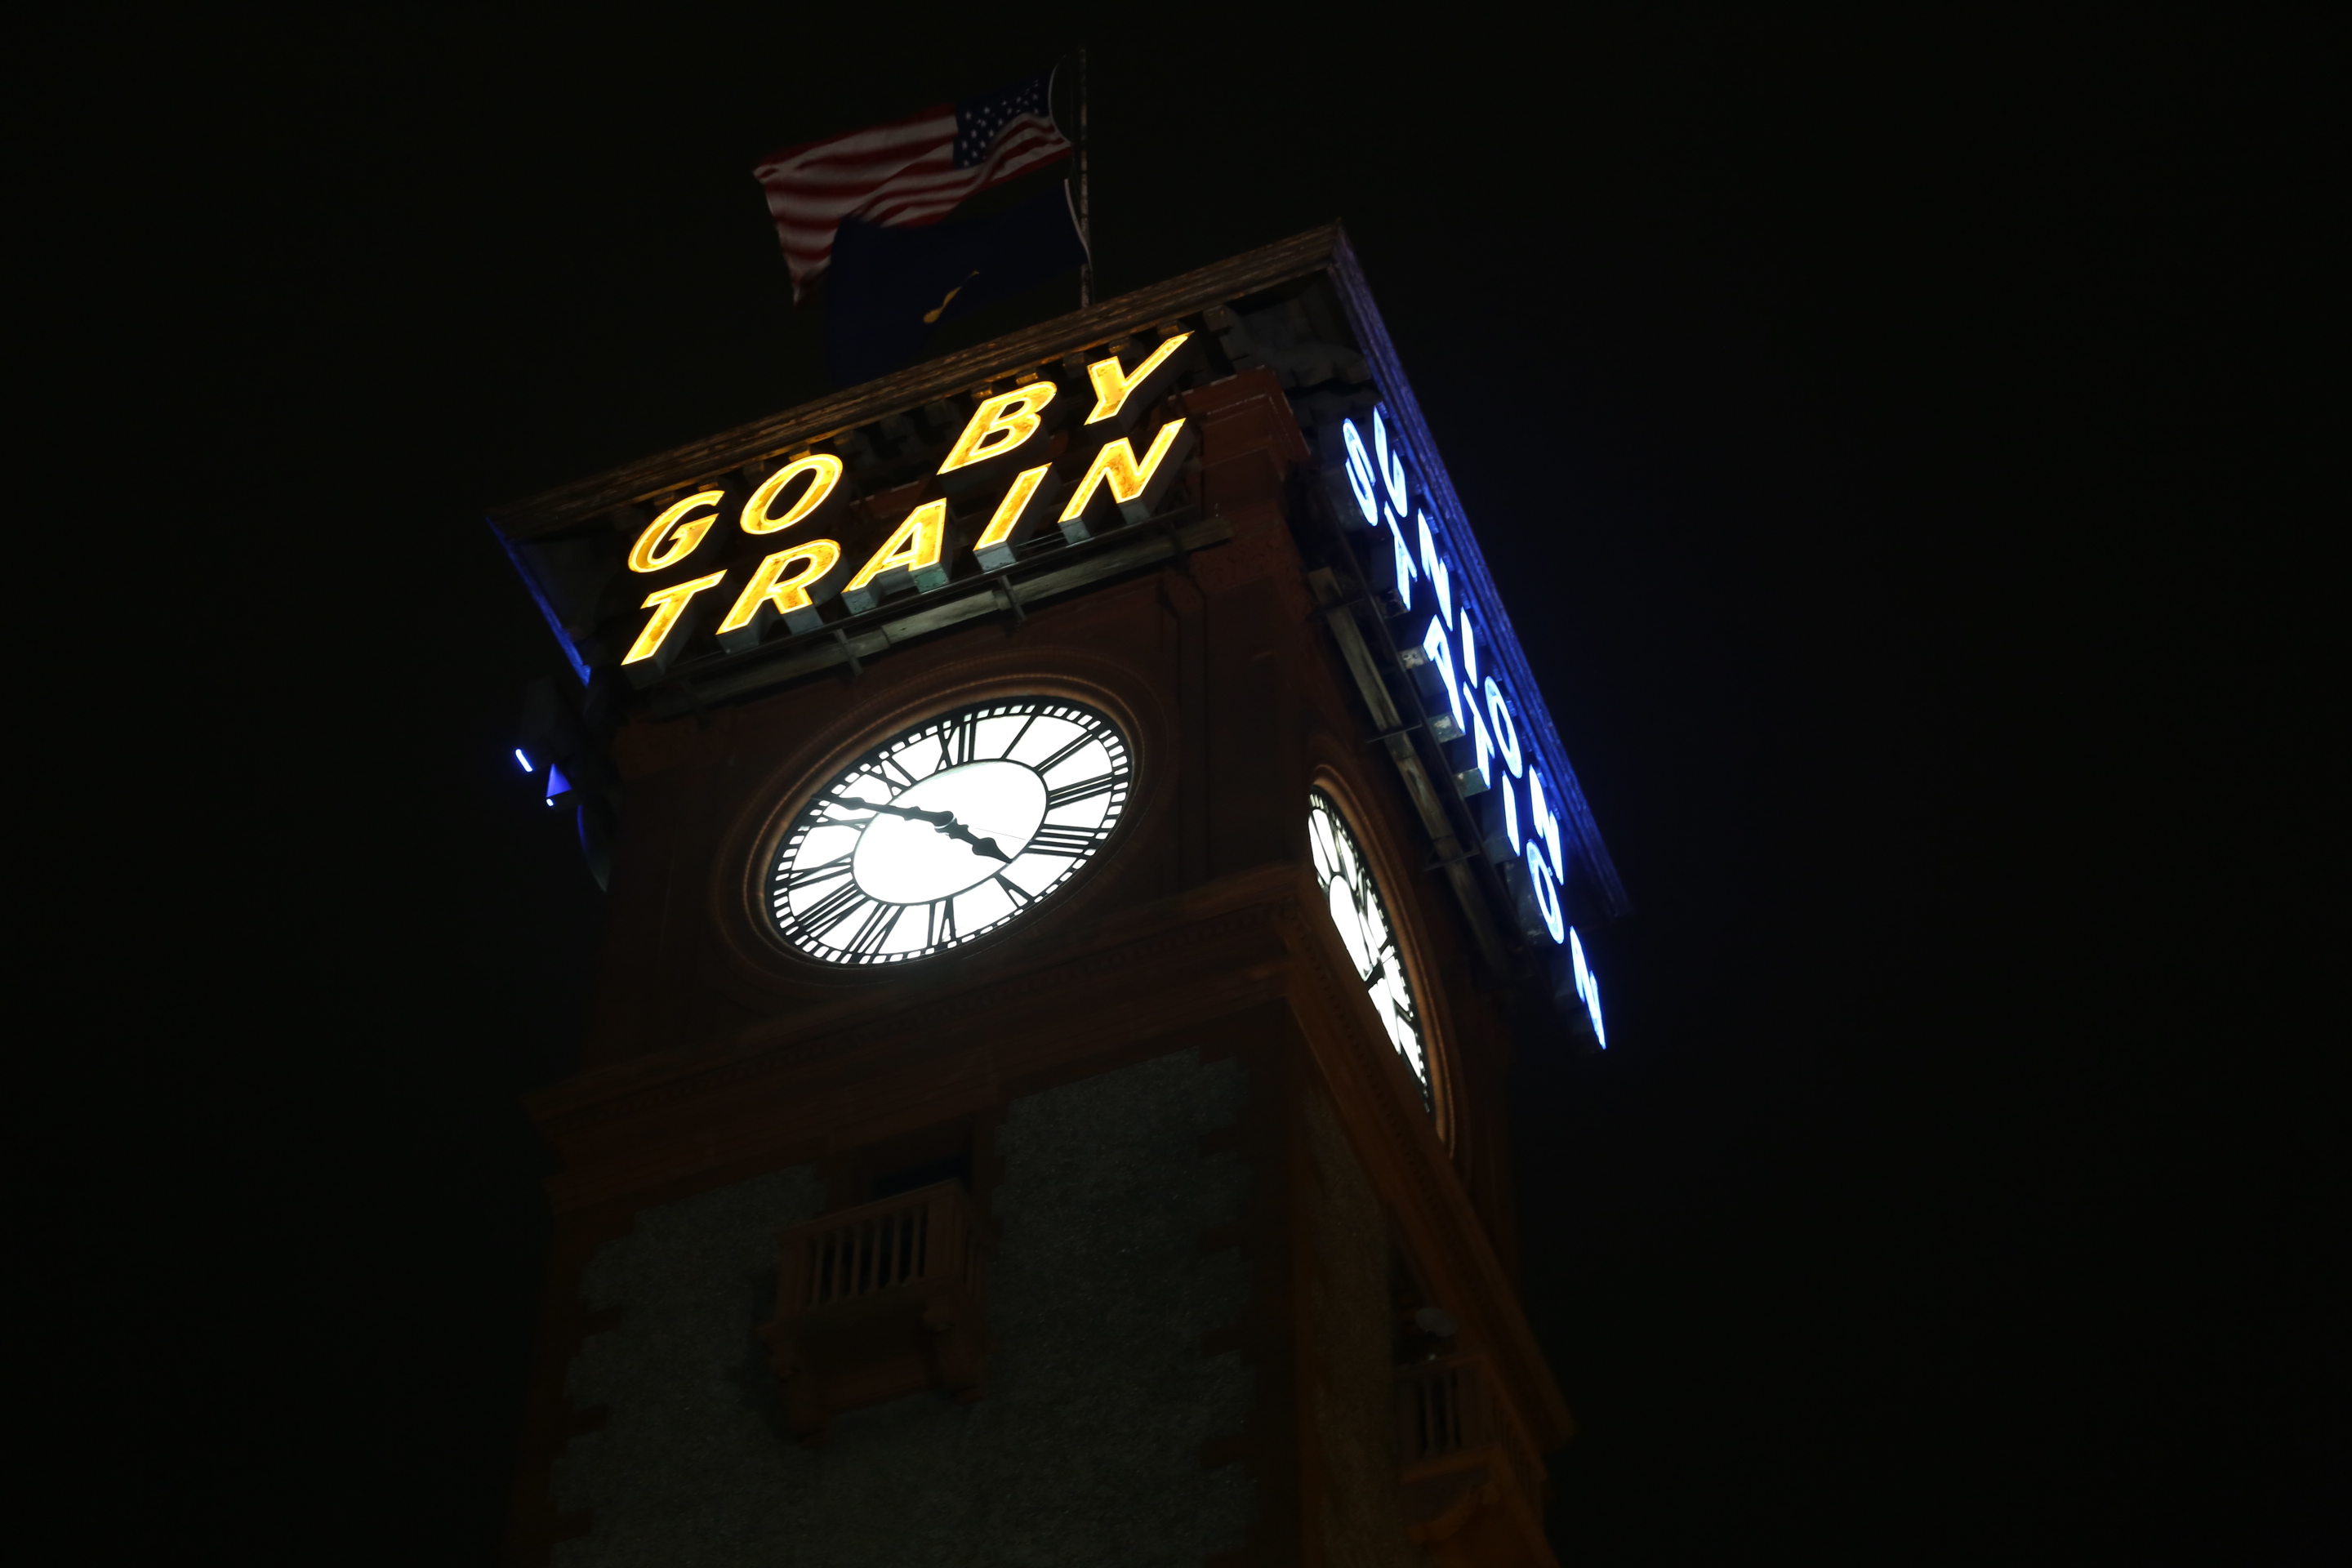 Time marches forward at Portland's historic Union Station on daylight  saving - OPB